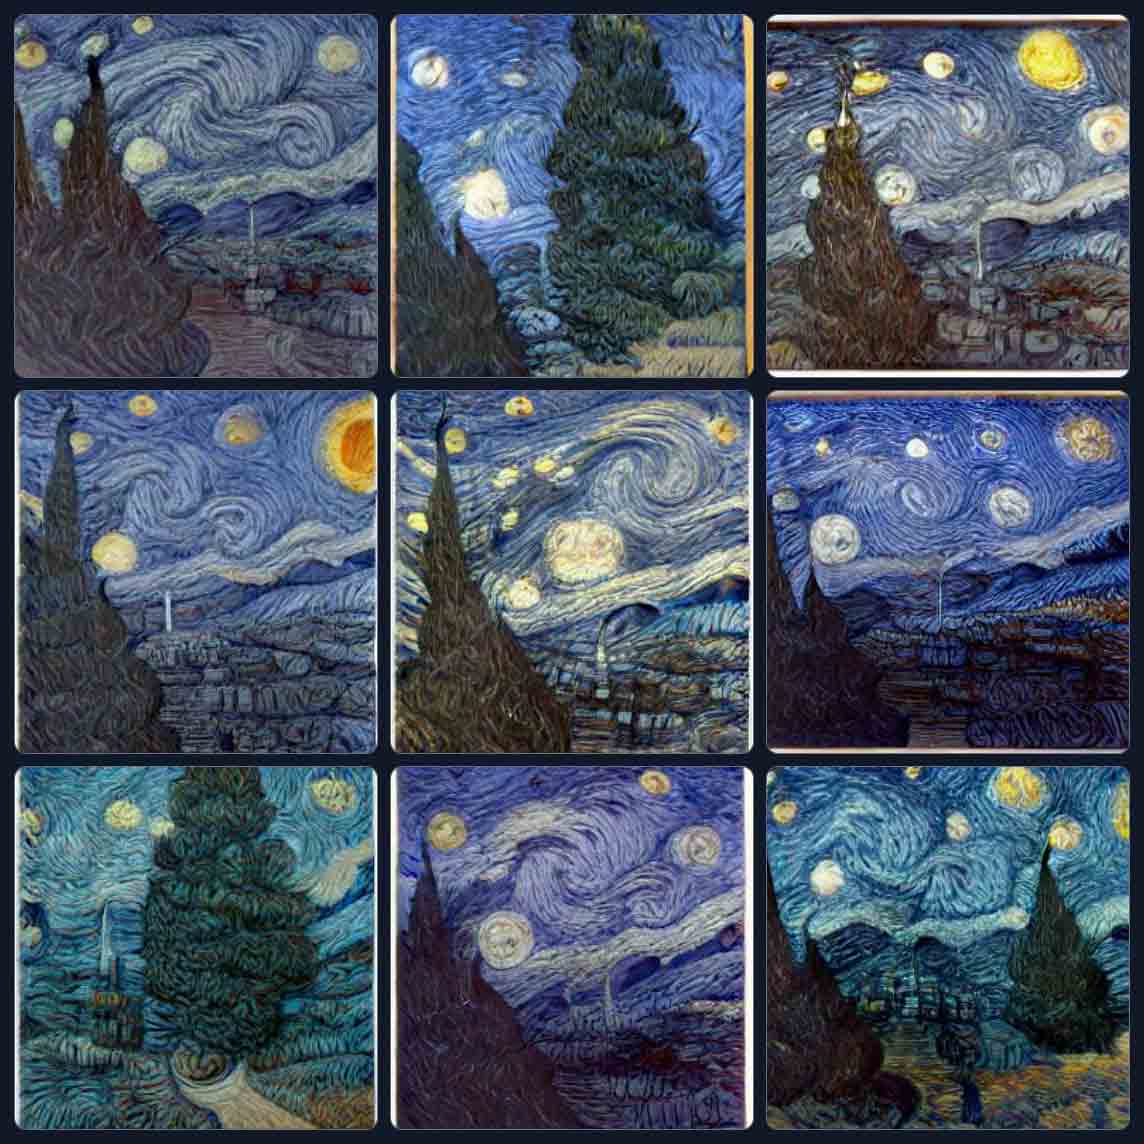 9 images in van Gogh's painterly style of wide, textured brush strokes defining sweeping curls of blue and white painted skies, wide bars of dark colors making up the ground and distant village, and each one showing a prominent tree of curving strokes. Each has large stars and a moon and a tall, narrow steeple in the far background.